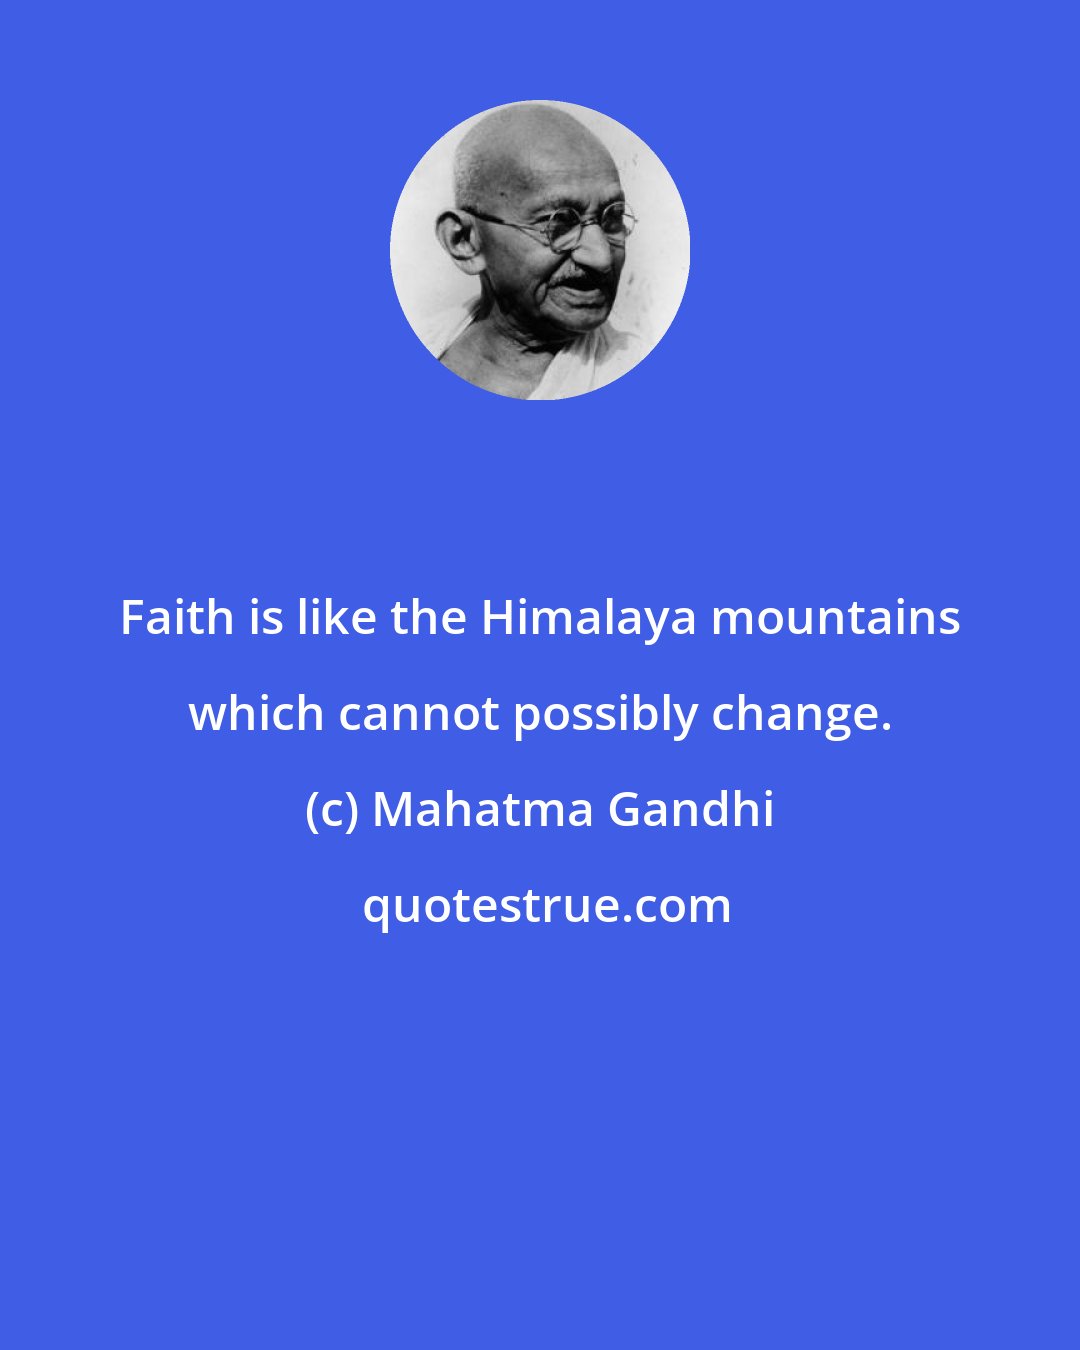 Mahatma Gandhi: Faith is like the Himalaya mountains which cannot possibly change.